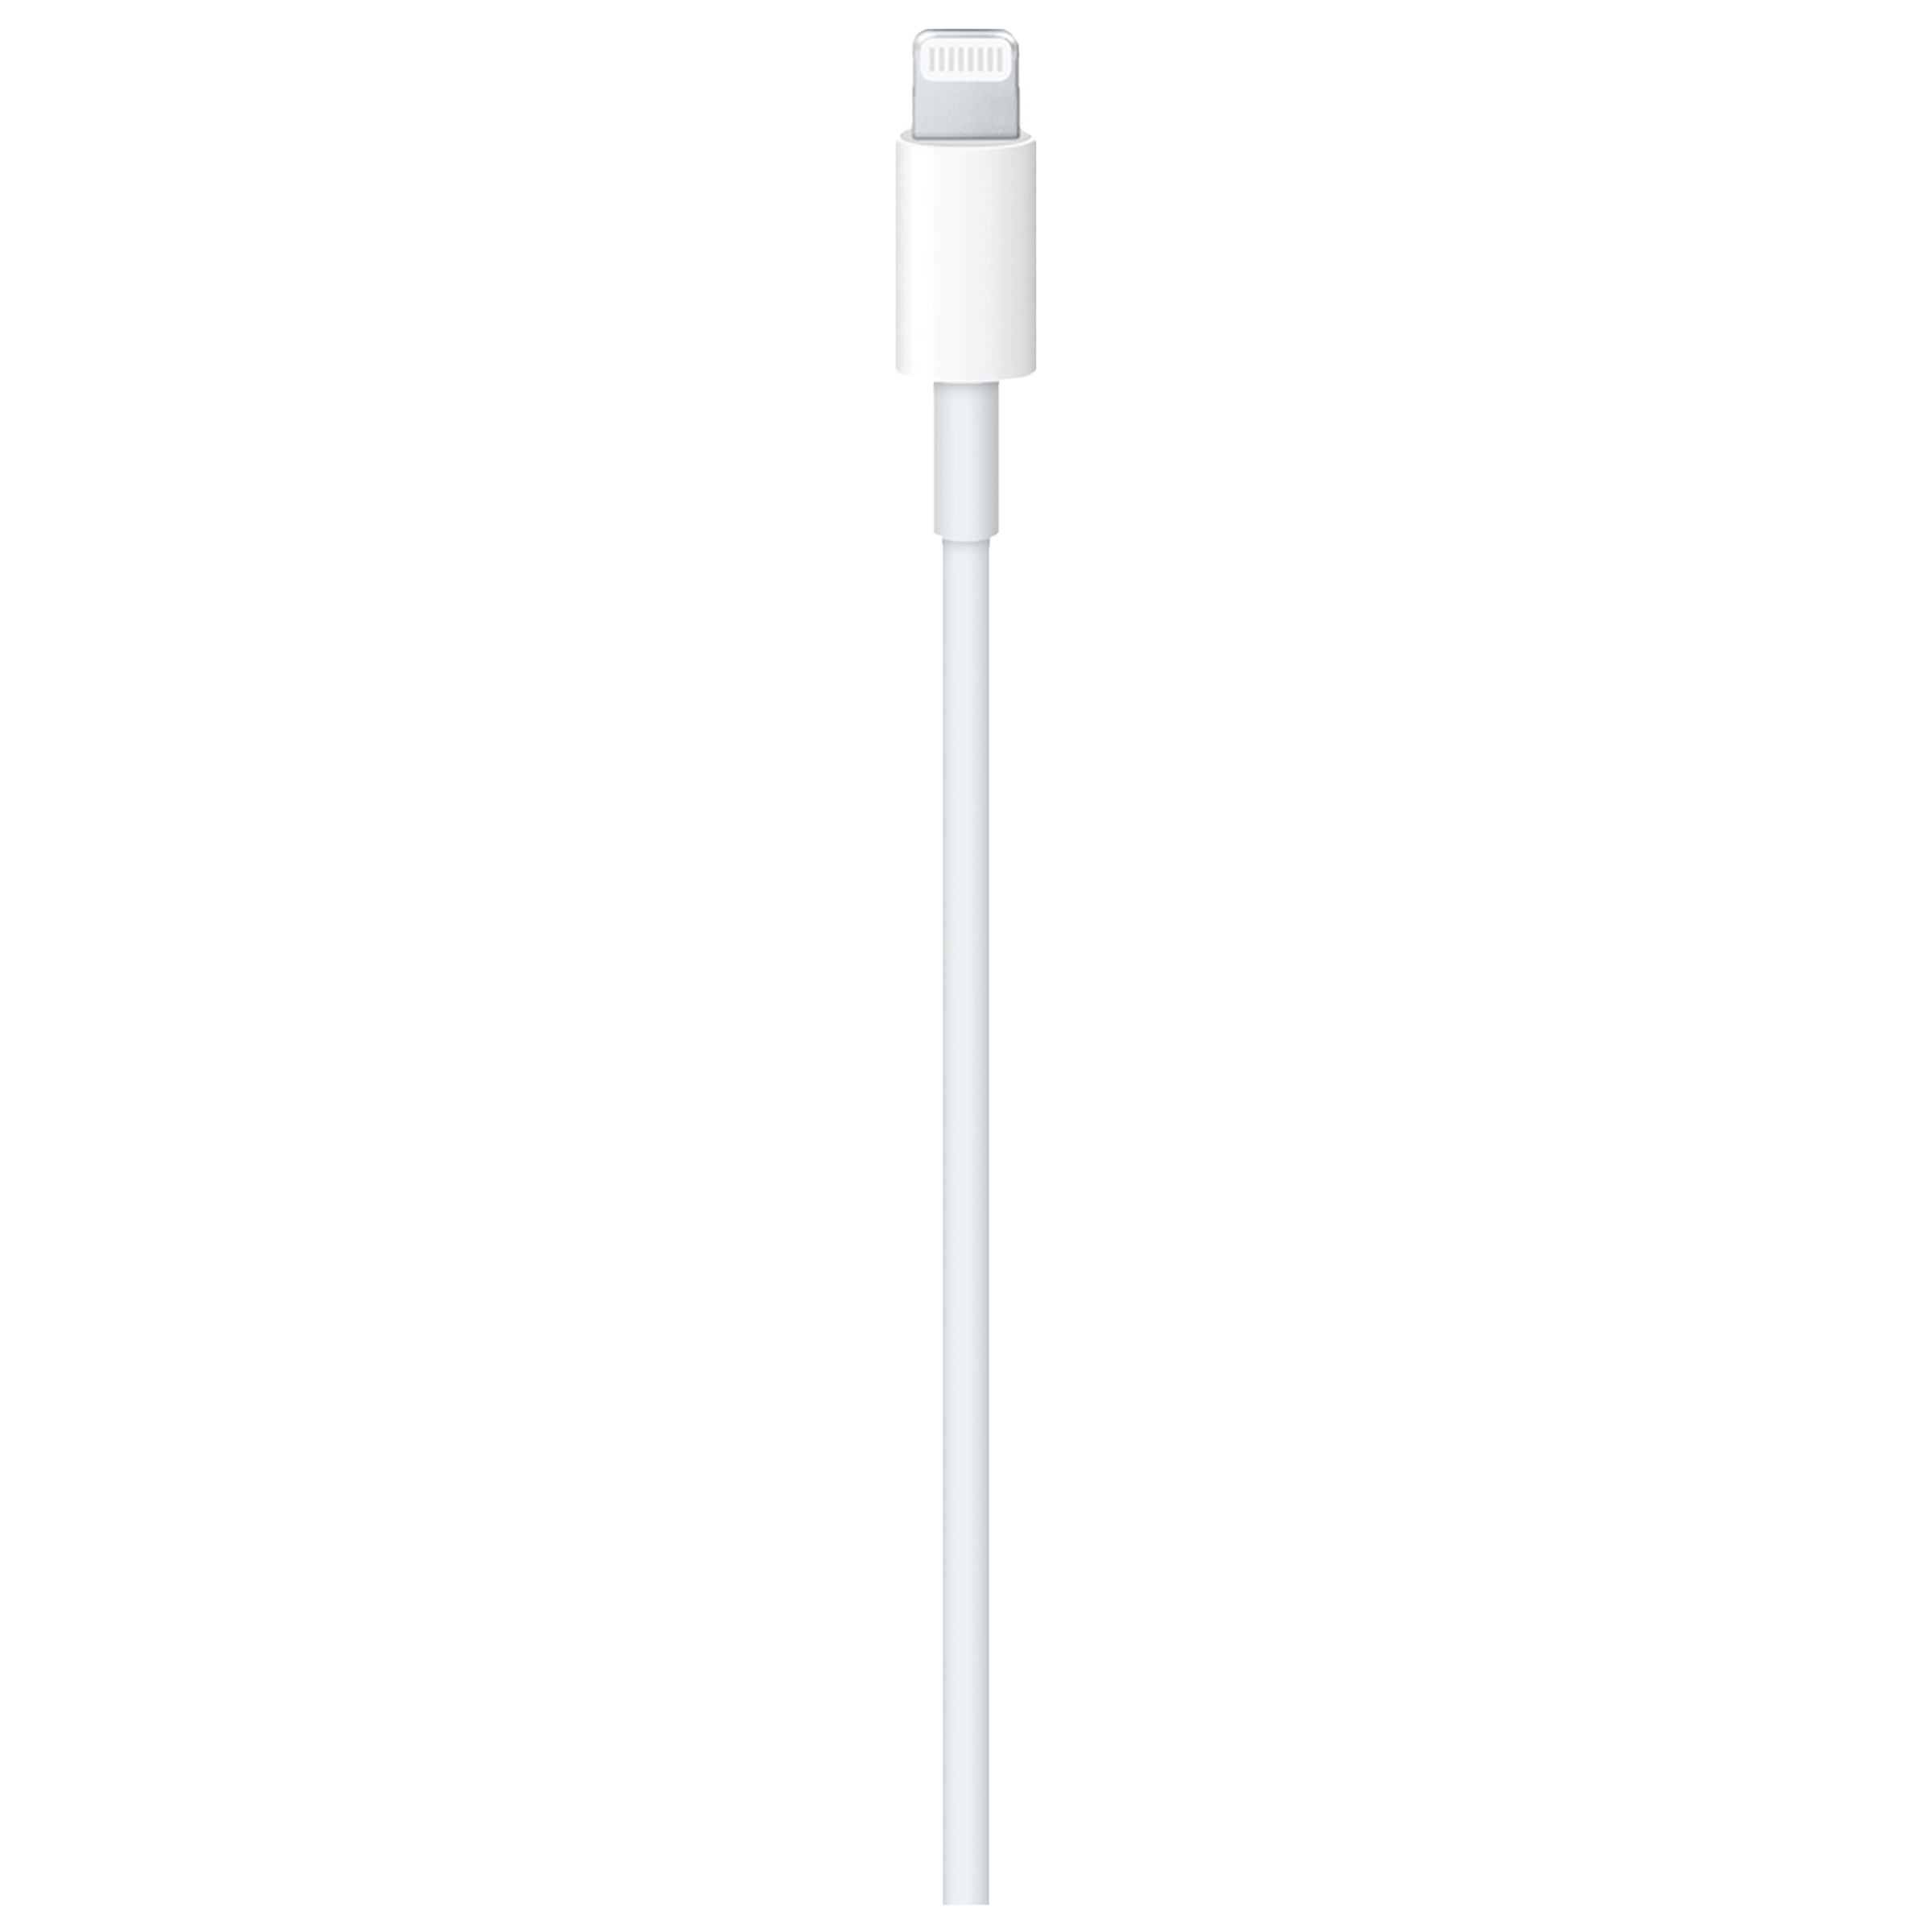 Buy Apple Type C to Lightning 3.3 Feet (1M) Cable (Sync and Charge